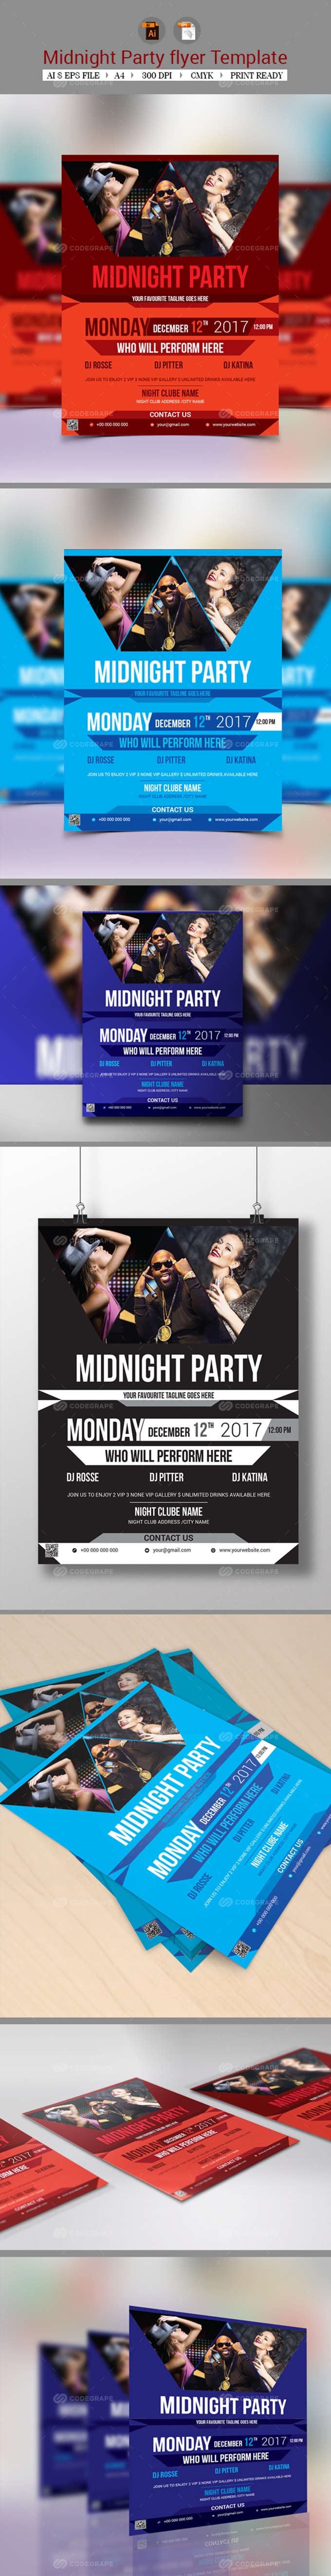 Midnight Party Flyer